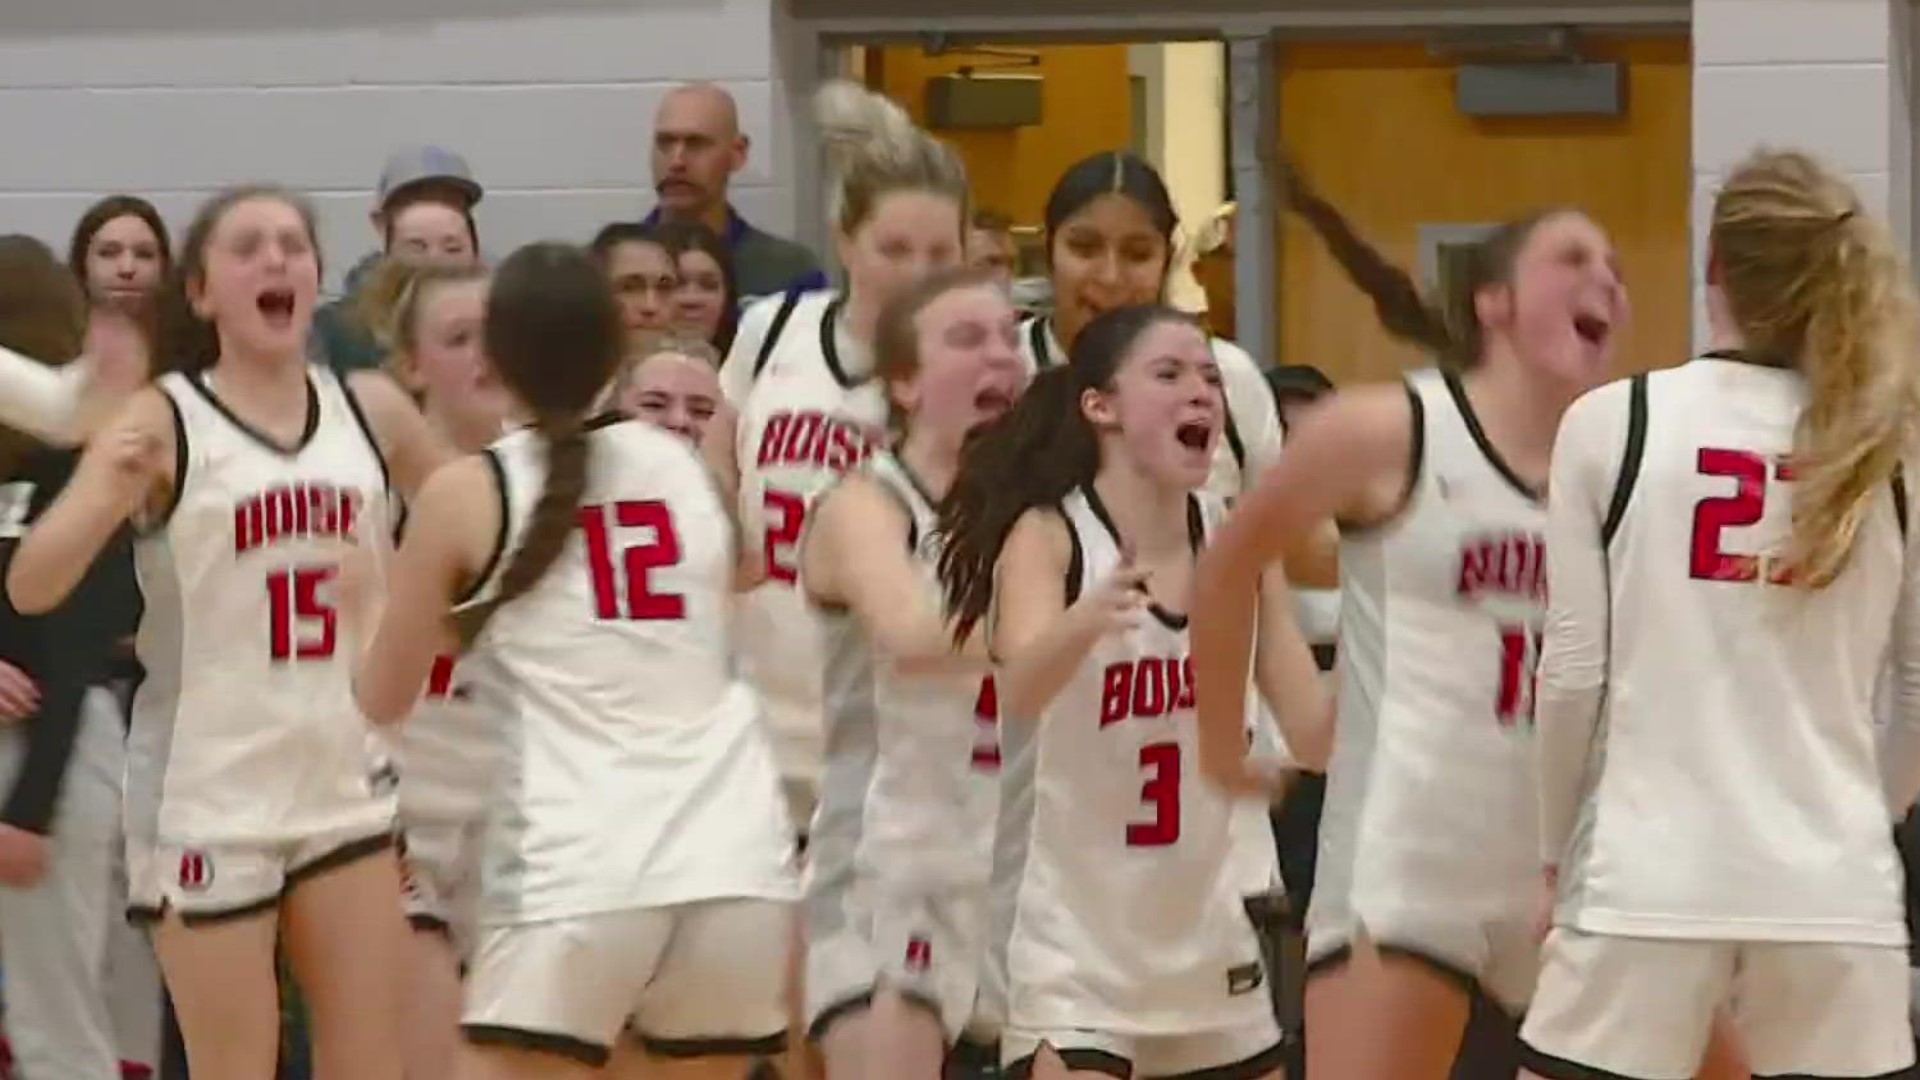 The Boise Brave are heading to the state tournament and 5A Southern Idaho Conference district title game after defeating Timberline 54-47 Saturday night.